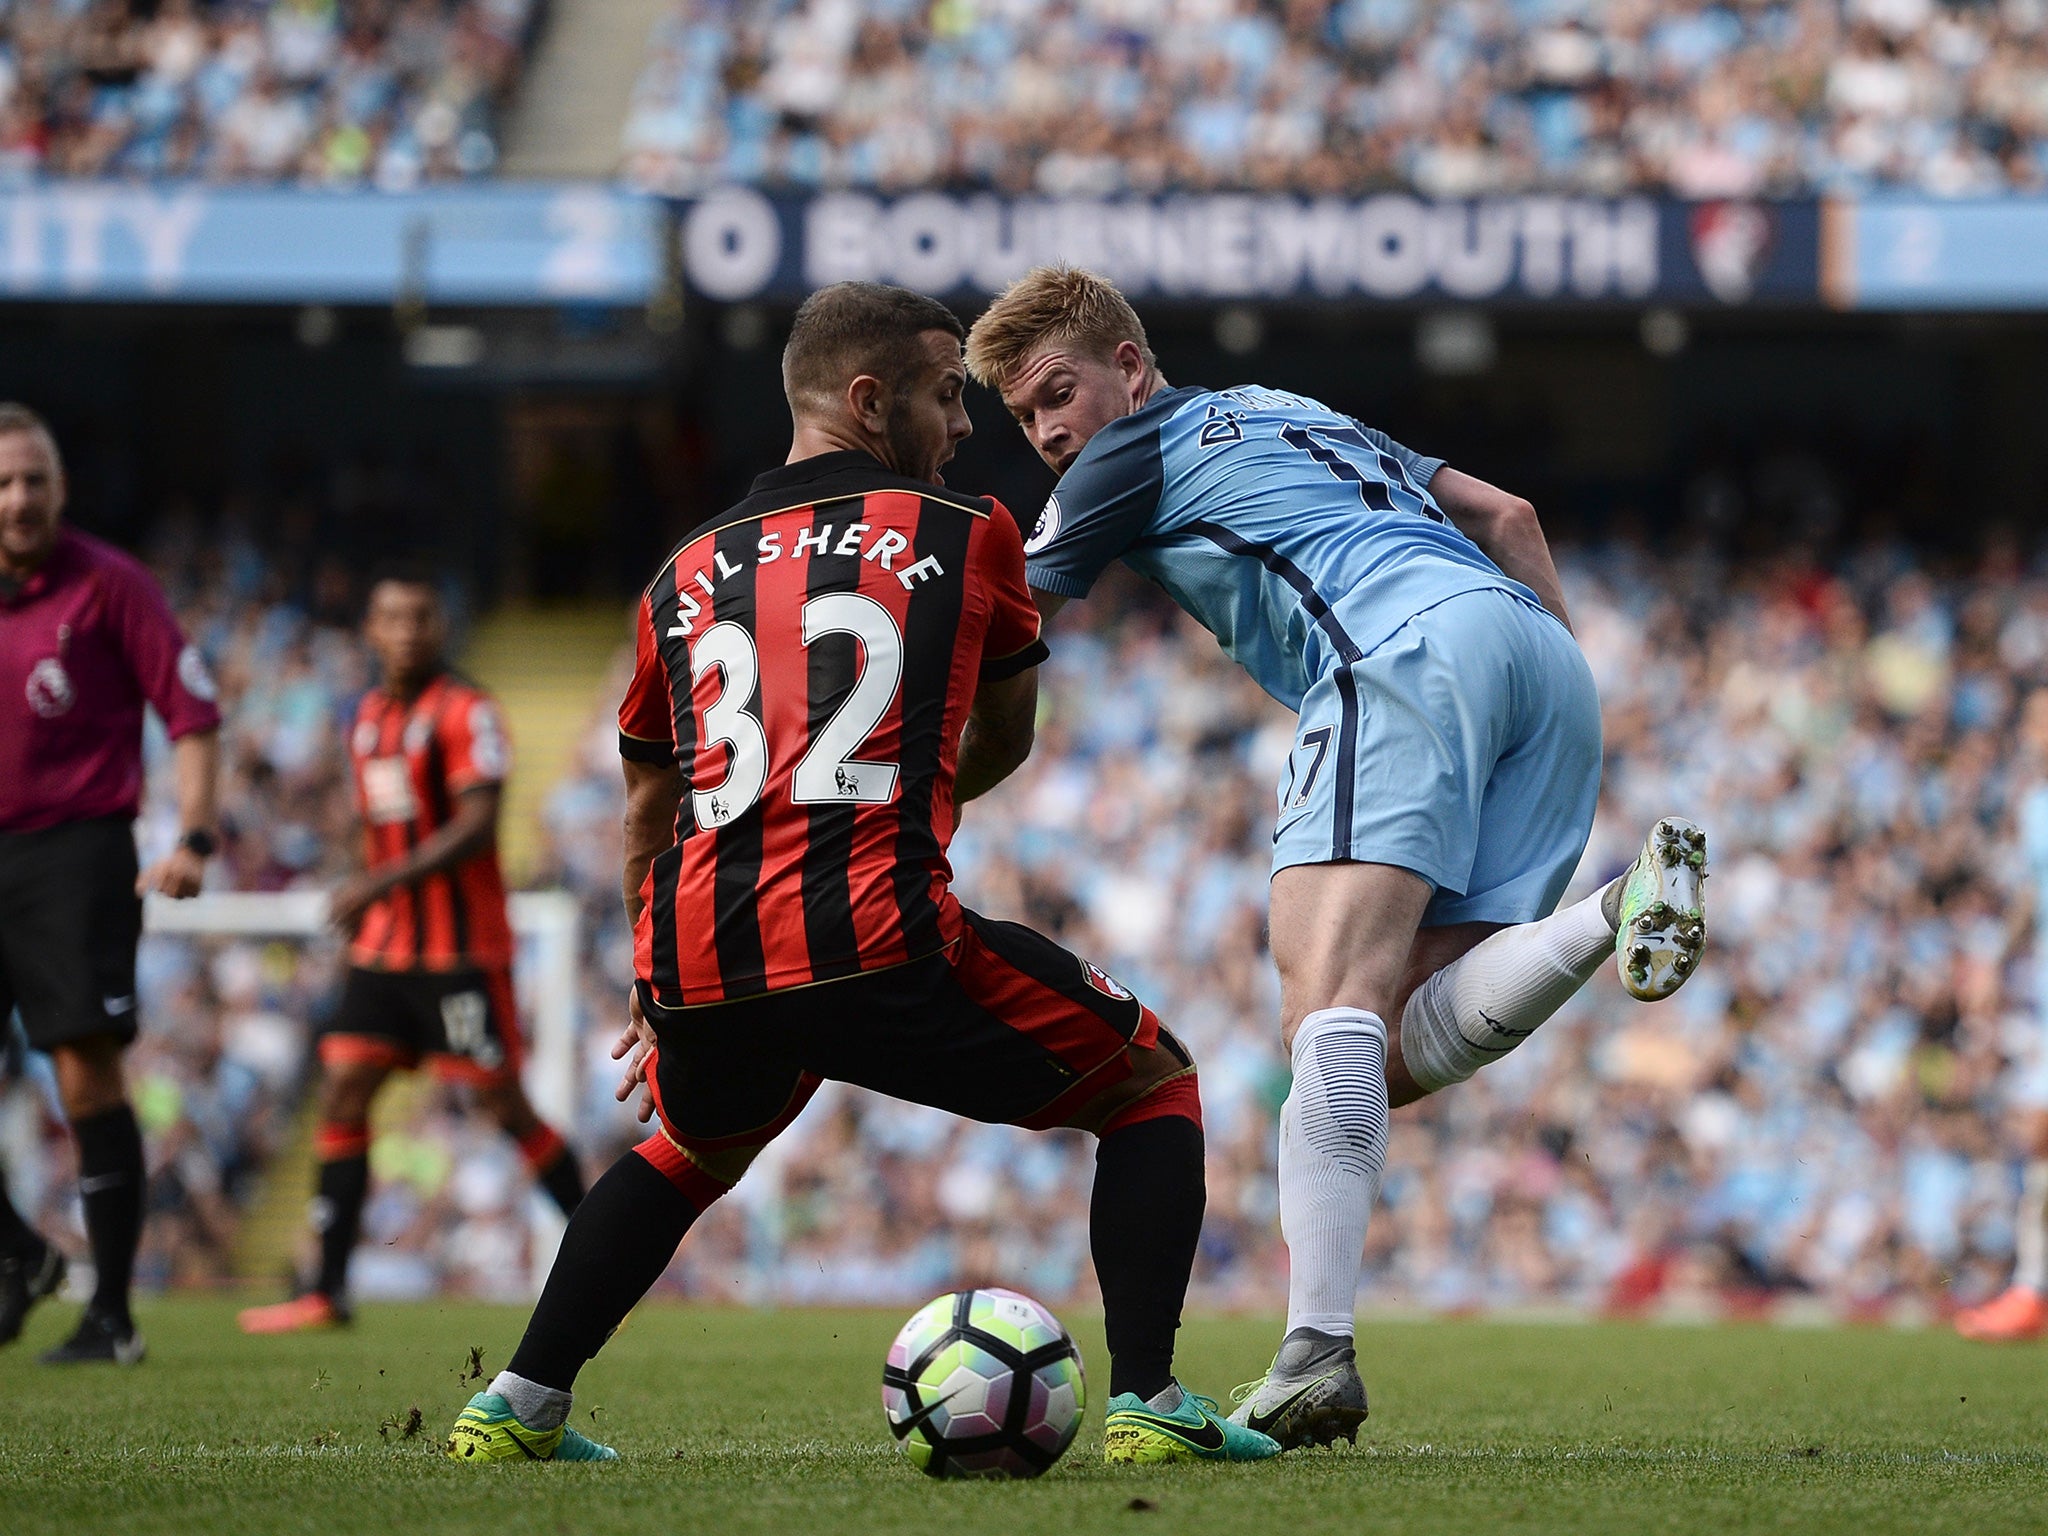 Wilshere had little impact on his full Bournemouth debut